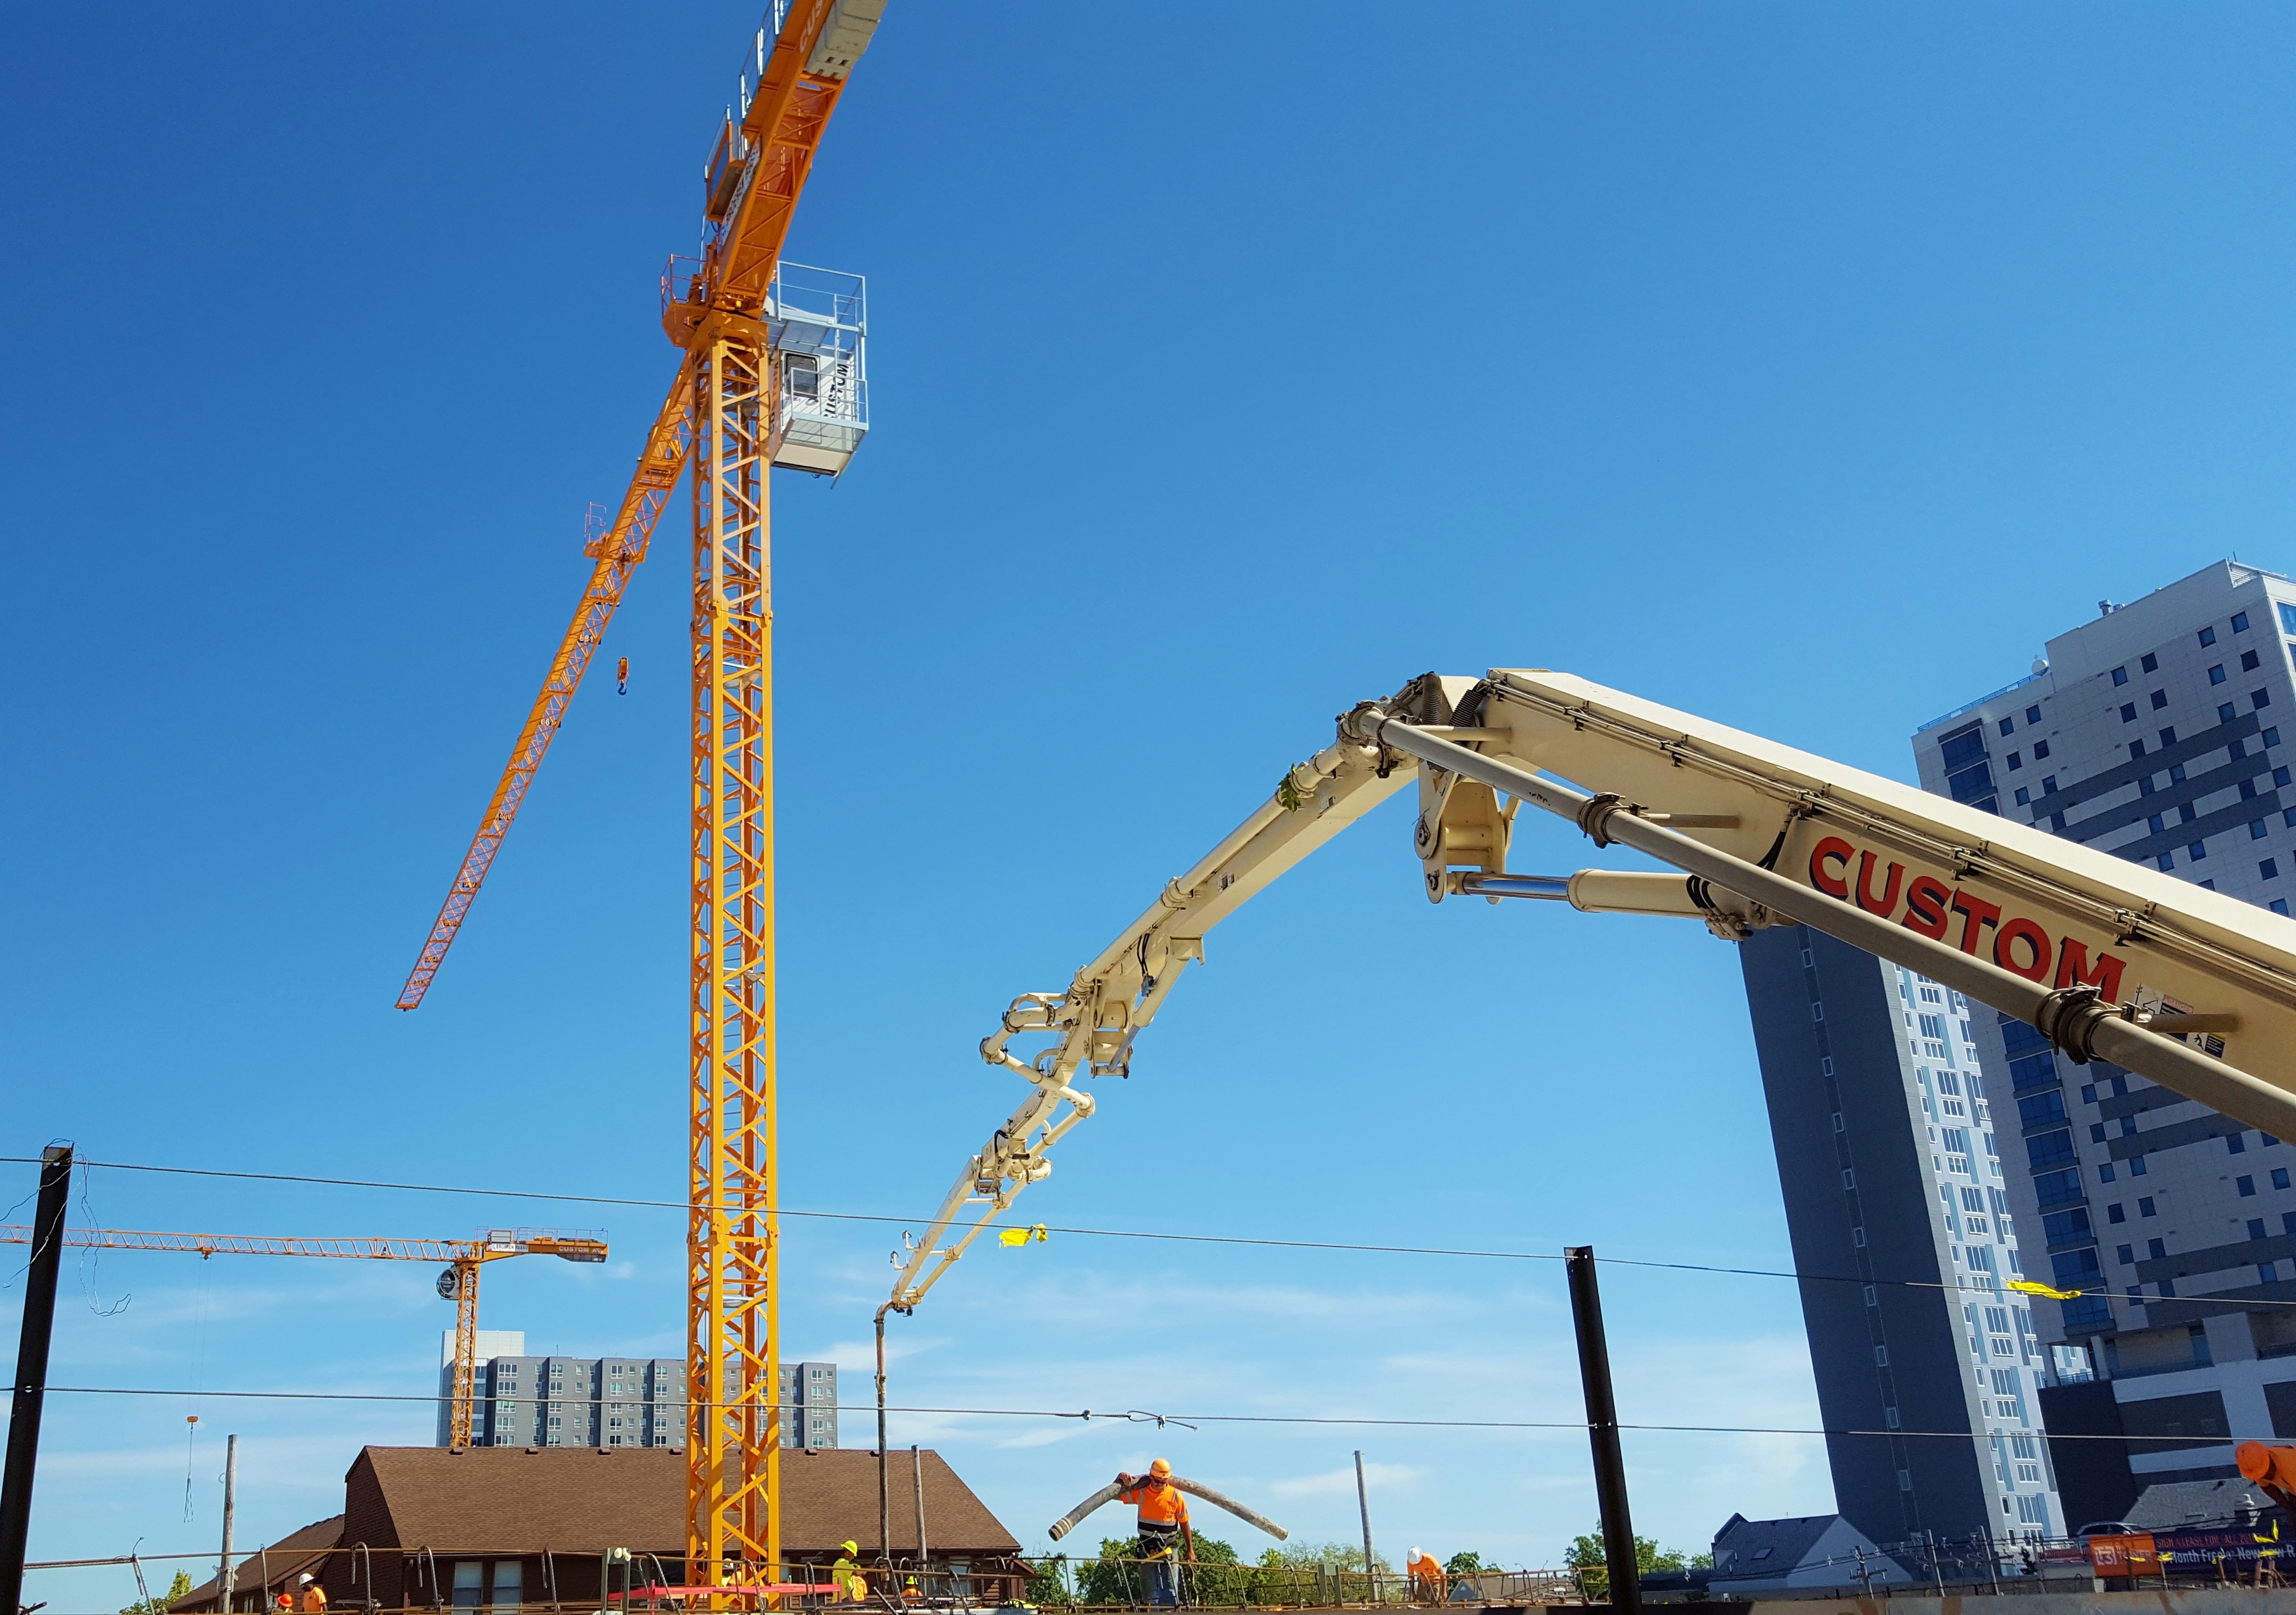 CSCs 39 meter pump truck, tower cranes, and employees work hard at apartment complex in Champaign, IL.